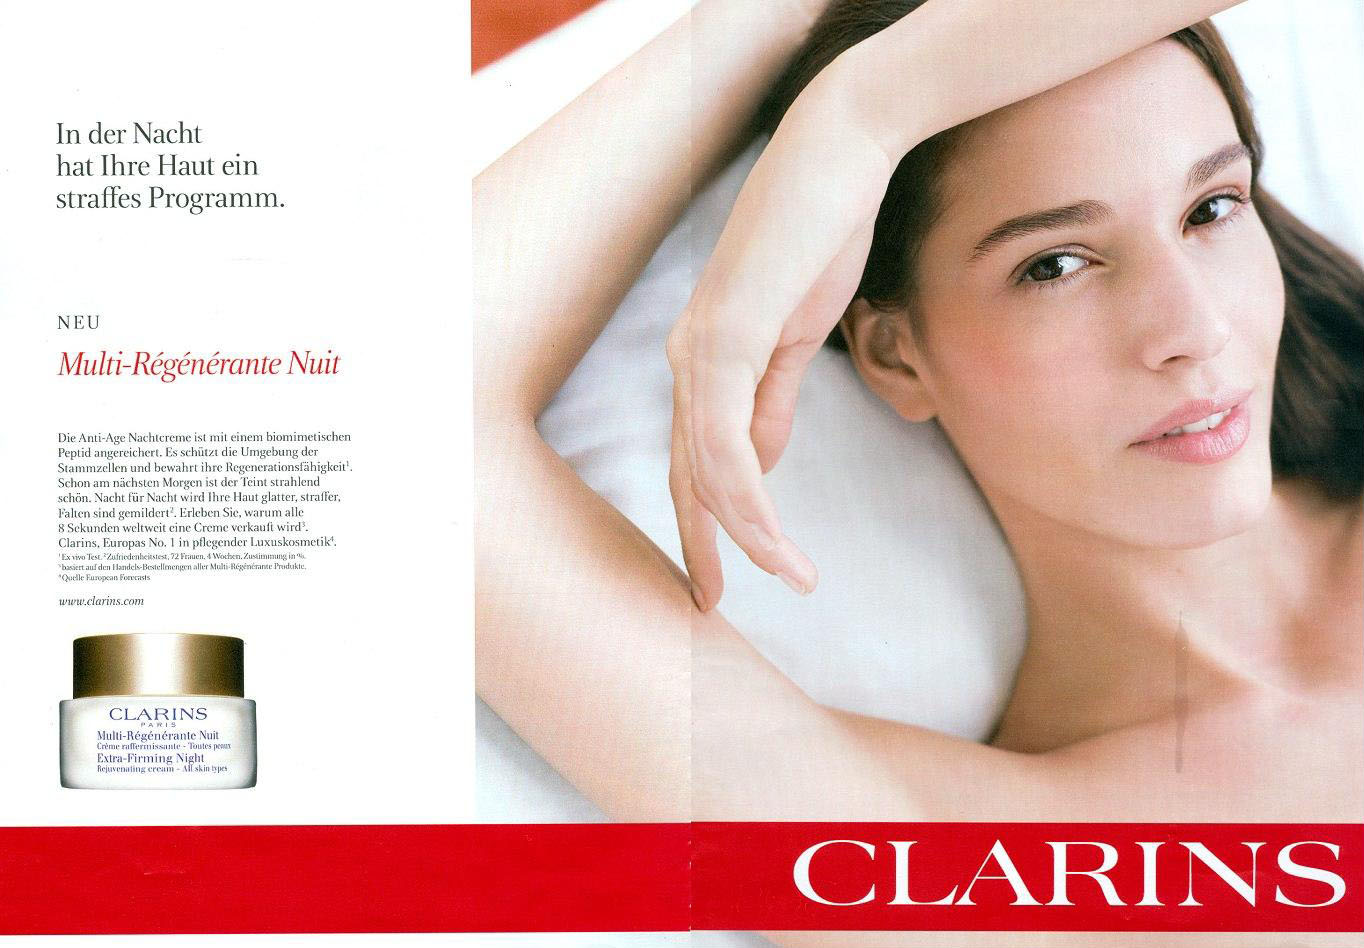 clarins 2 pages